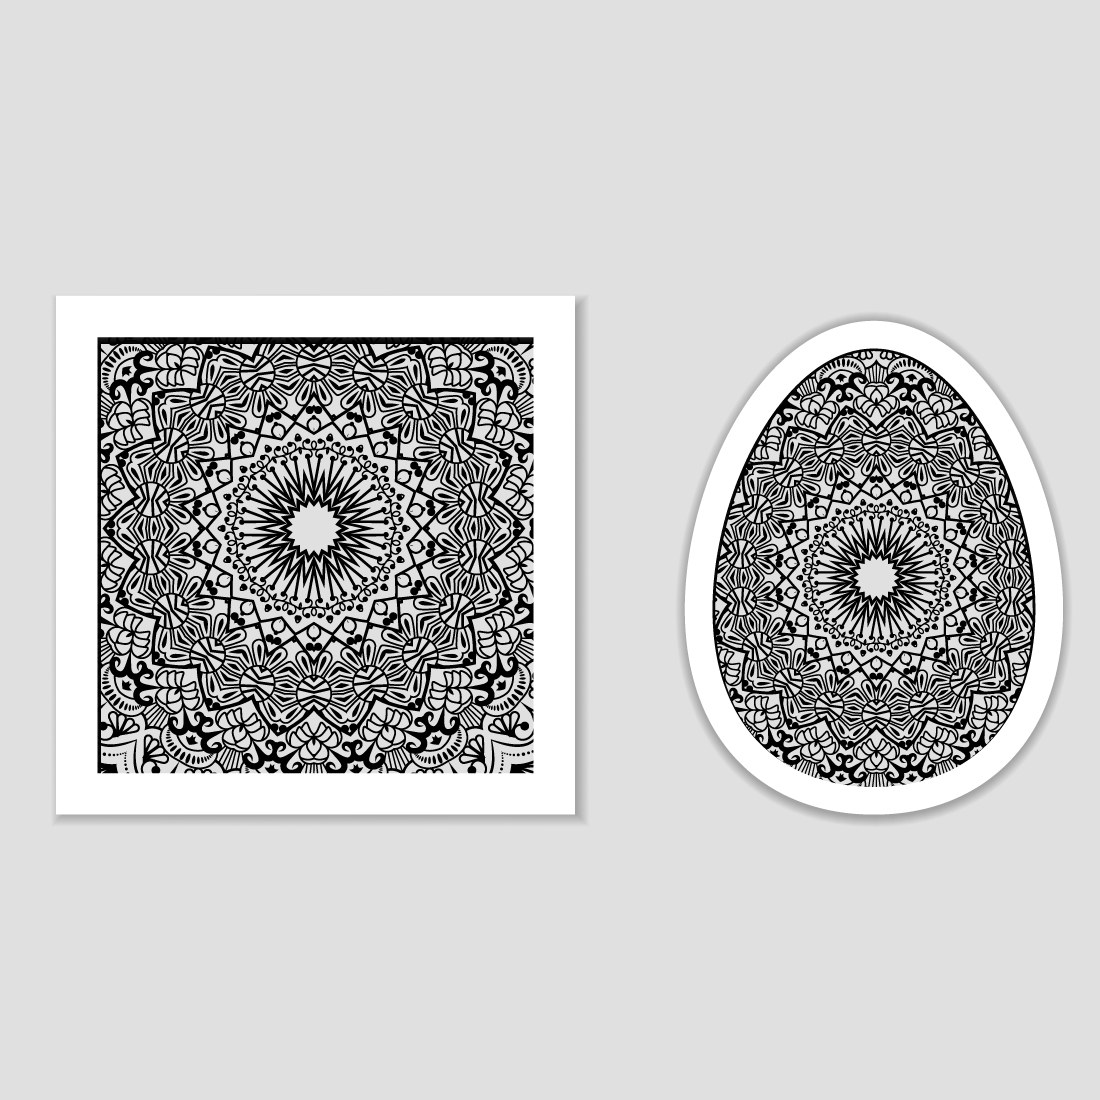 Mandala Pattern Design For Background, Scarf Pattern Texture For Print Cover.